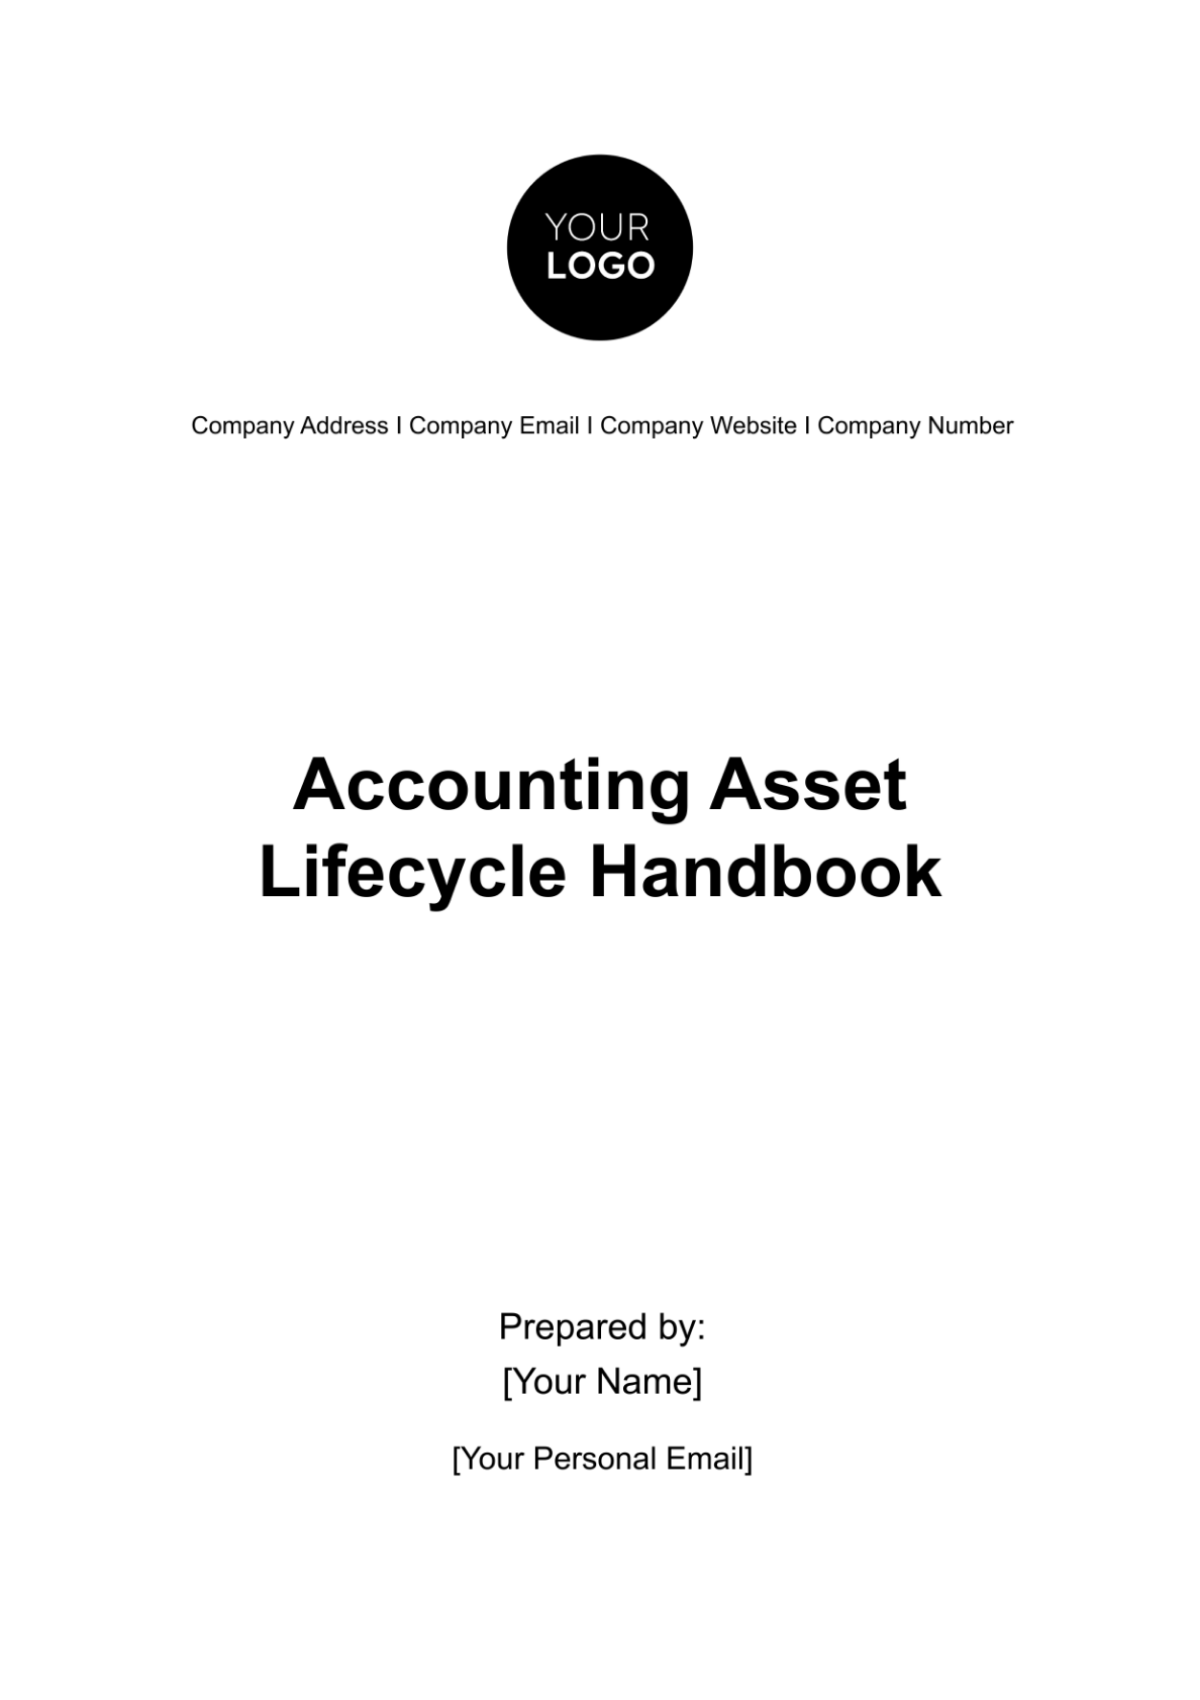 Free Accounting Asset Lifecycle Handbook Template